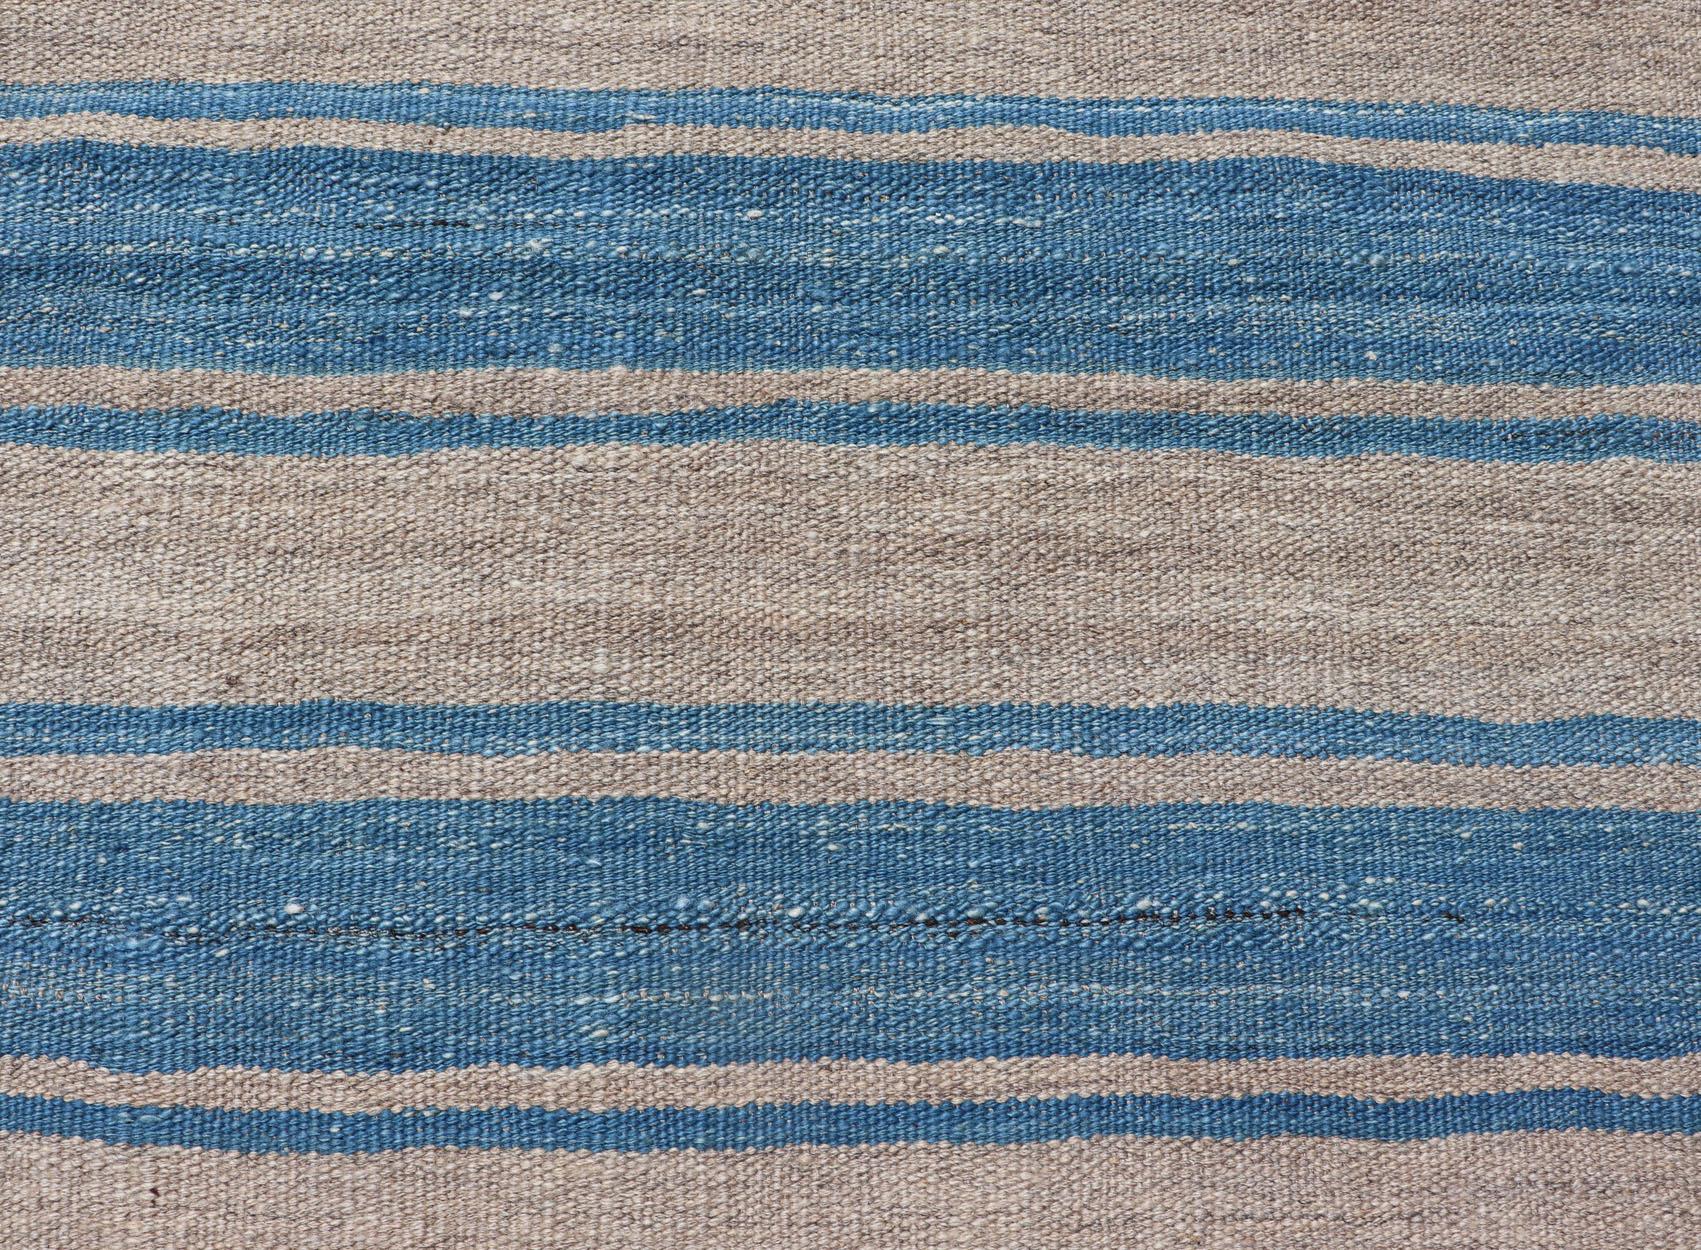 Flat-Weave Modern Kilim Rug with Stripes in Shades of Blue and Gray In Excellent Condition For Sale In Atlanta, GA